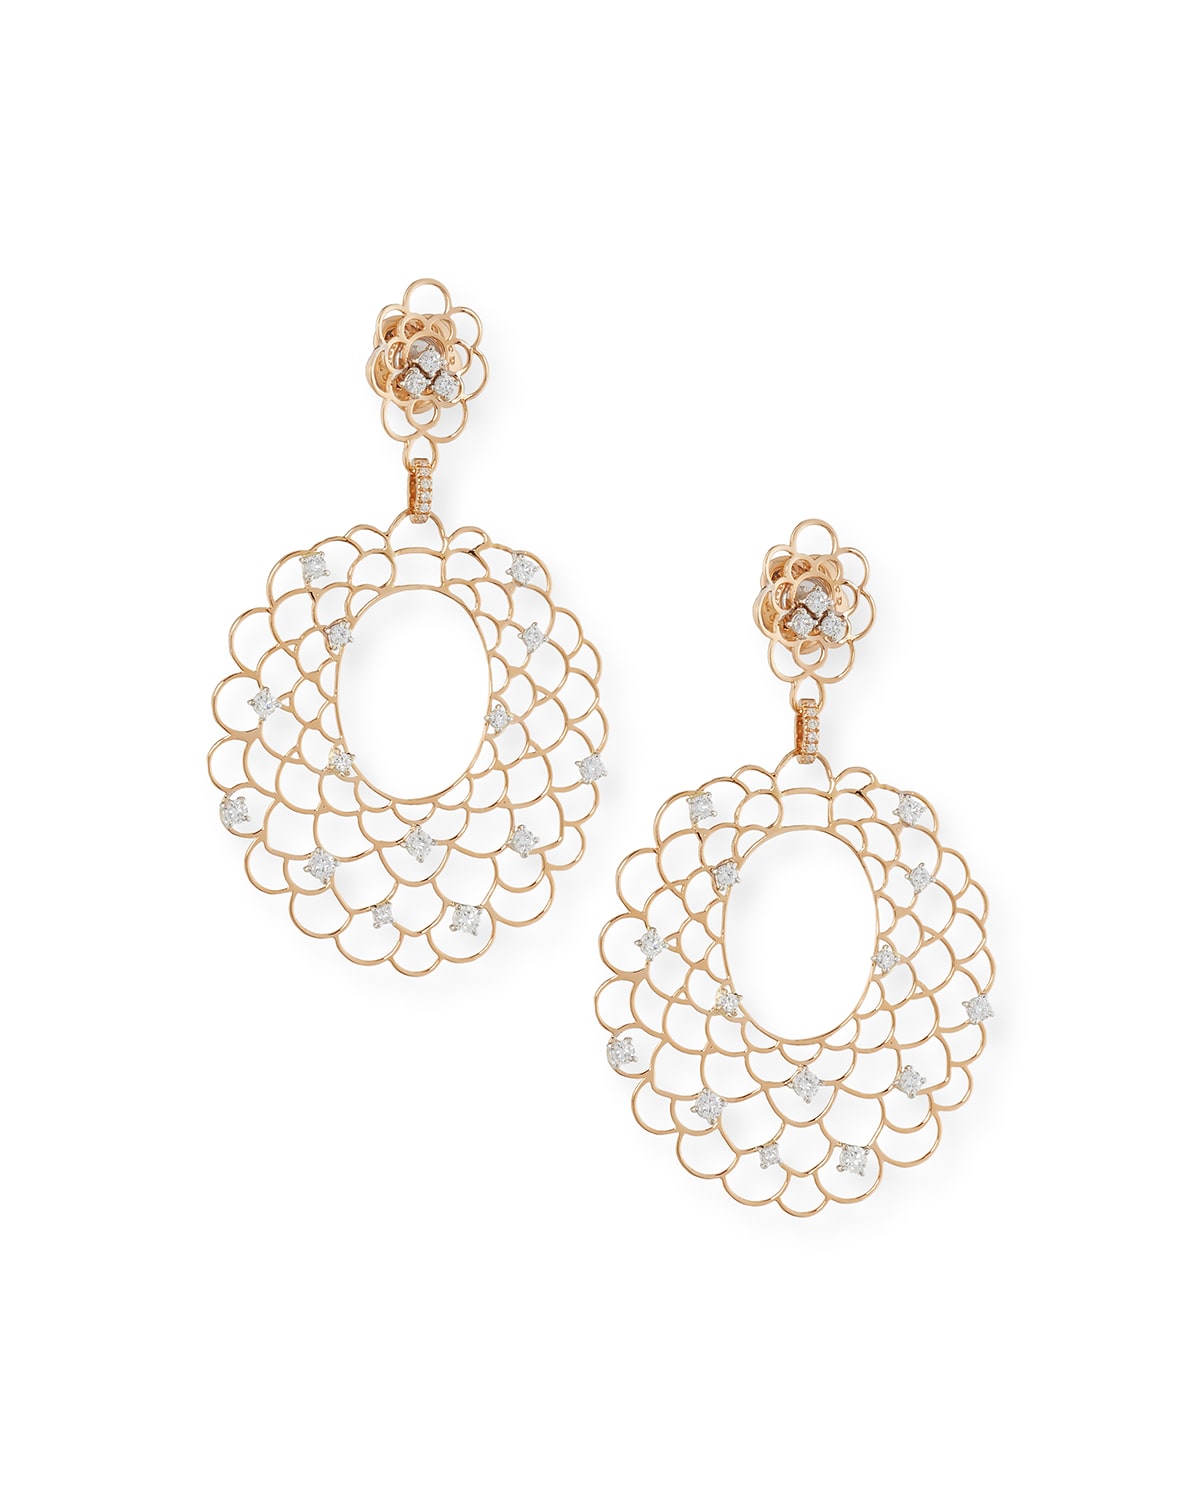 Staurino Moresca Chandelier Earrings With Diamonds In 18k Rose Gold